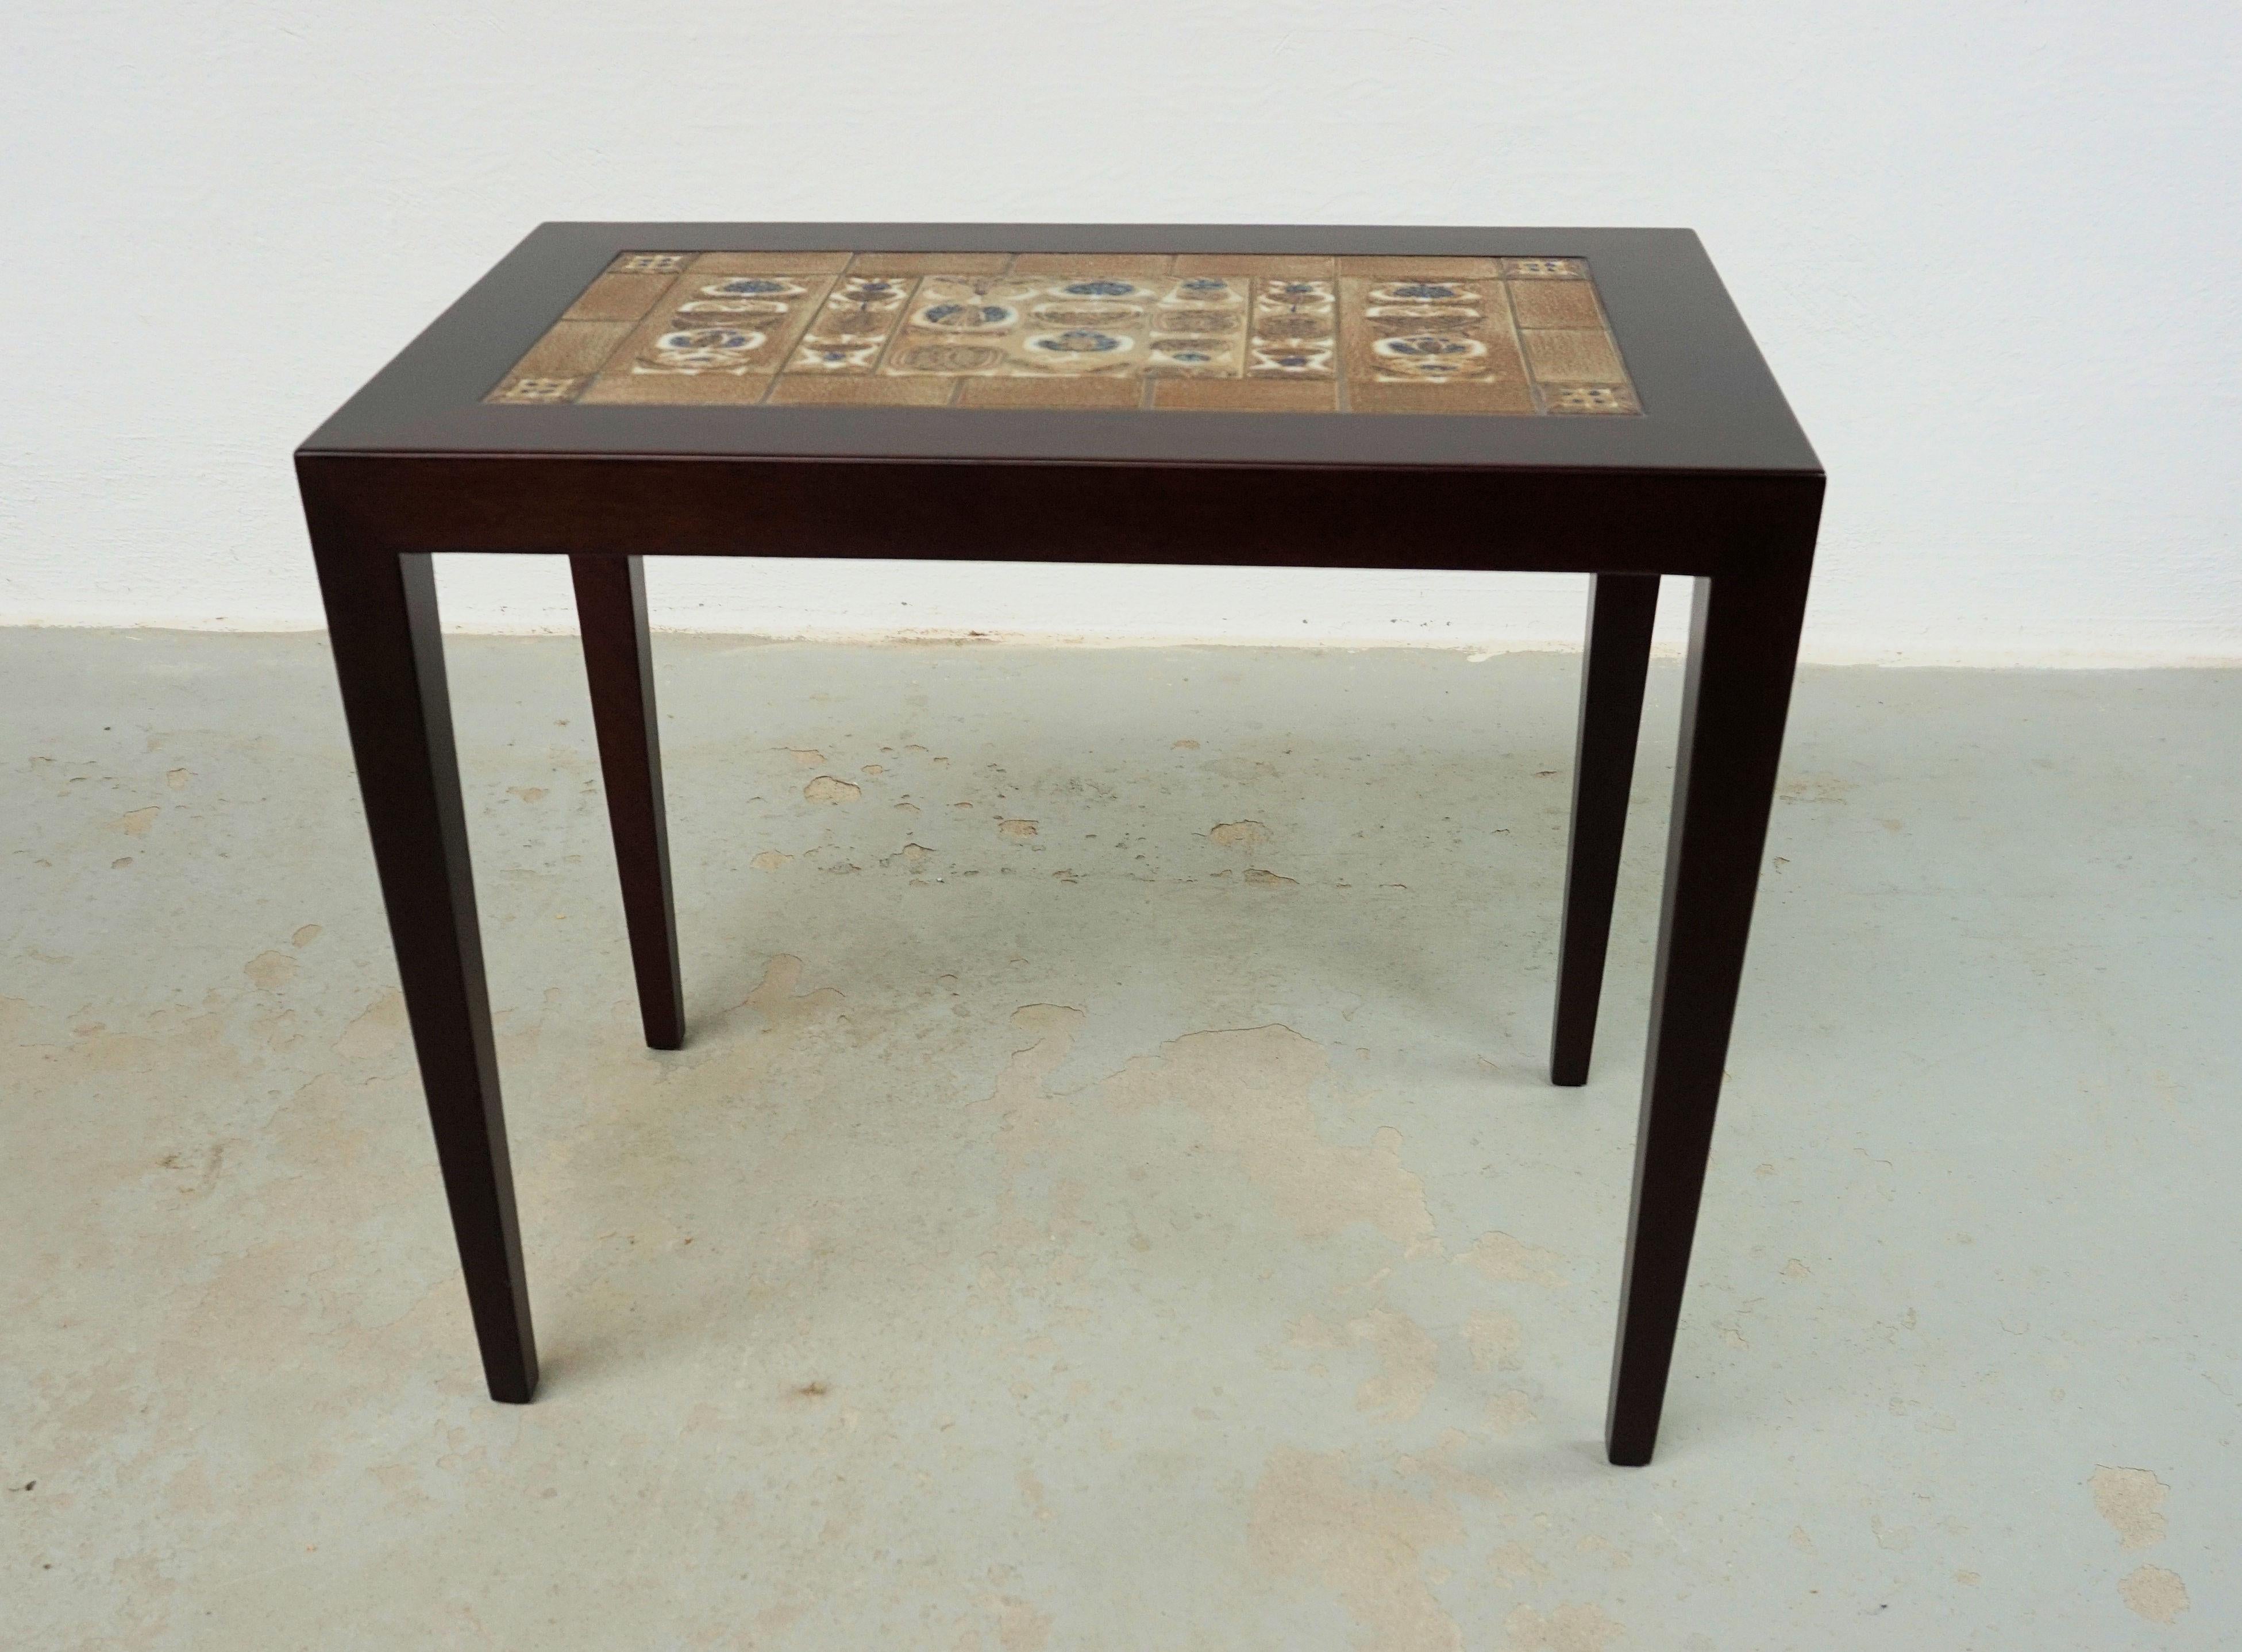 1960s restored Severin Hansen mahogny side table with Royal Copenhagen tiles designed ny Niels Thorsson
The shapes of the side table bear witness of Severin Hansen jr.'s ability to combine simplicity with elegance that combined with the colorfull